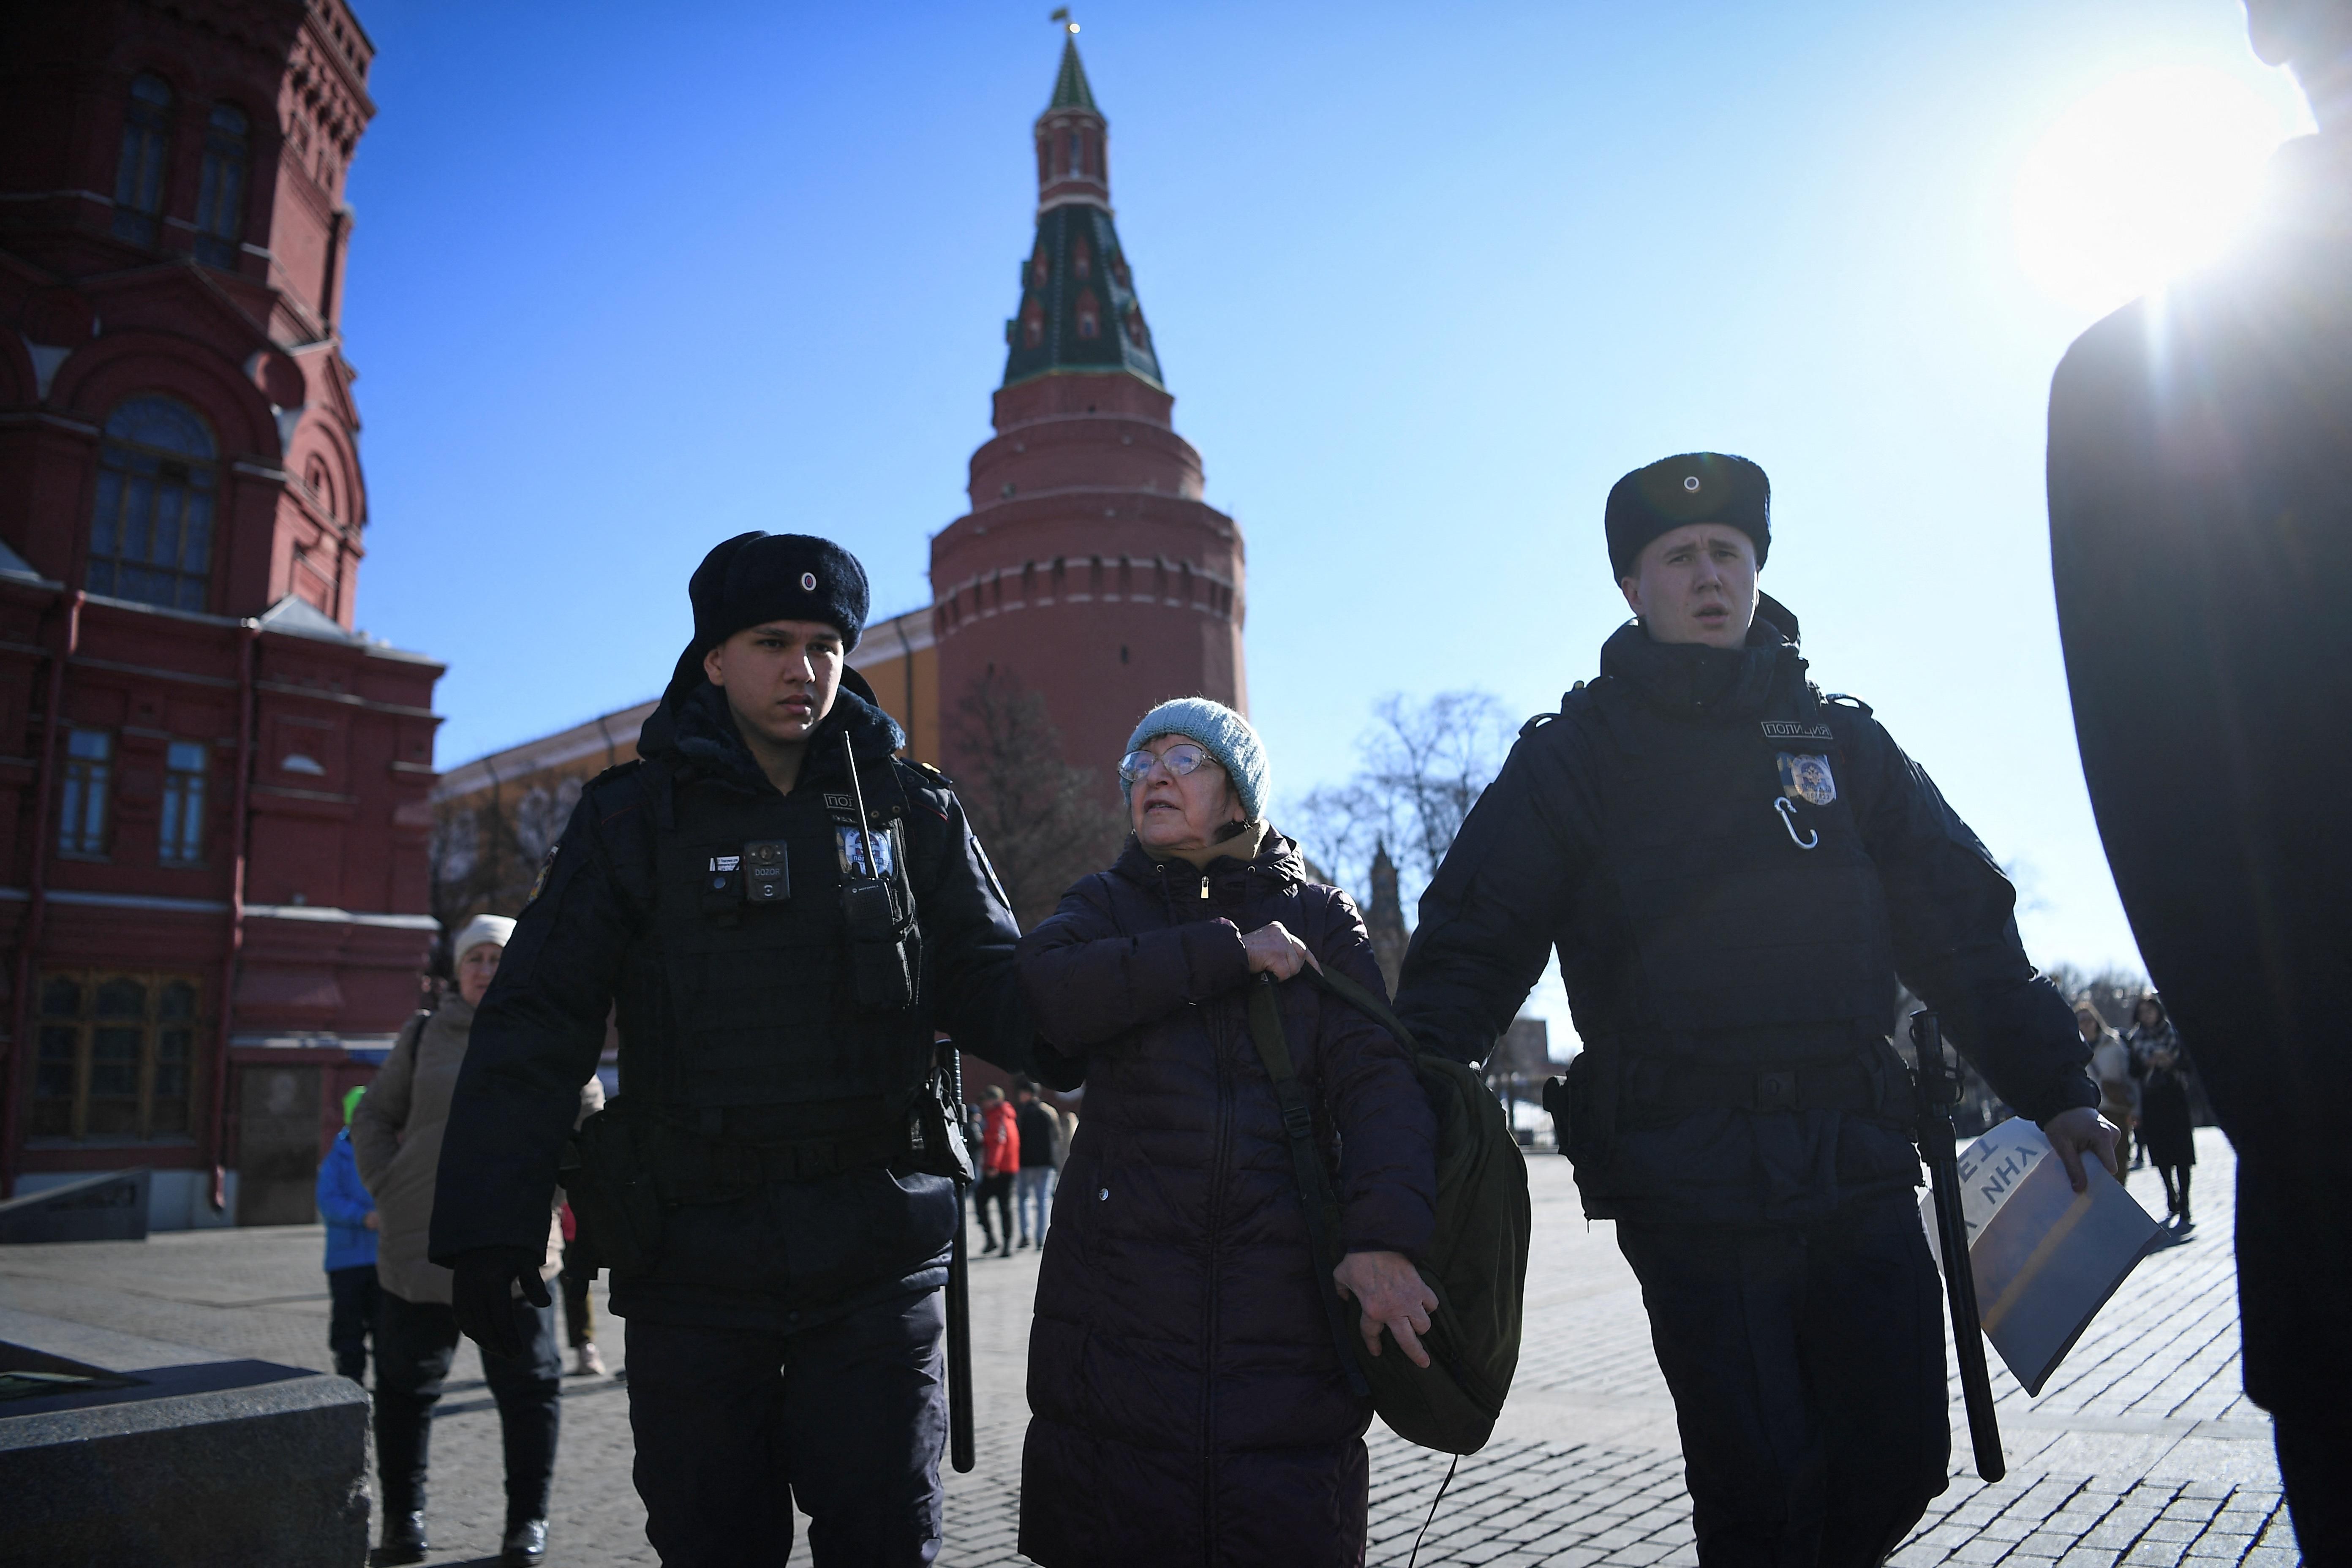 Police officers detain an elderly woman as she protests against Russia's invasion of Ukraine, in central Moscow on March 20, 2022.